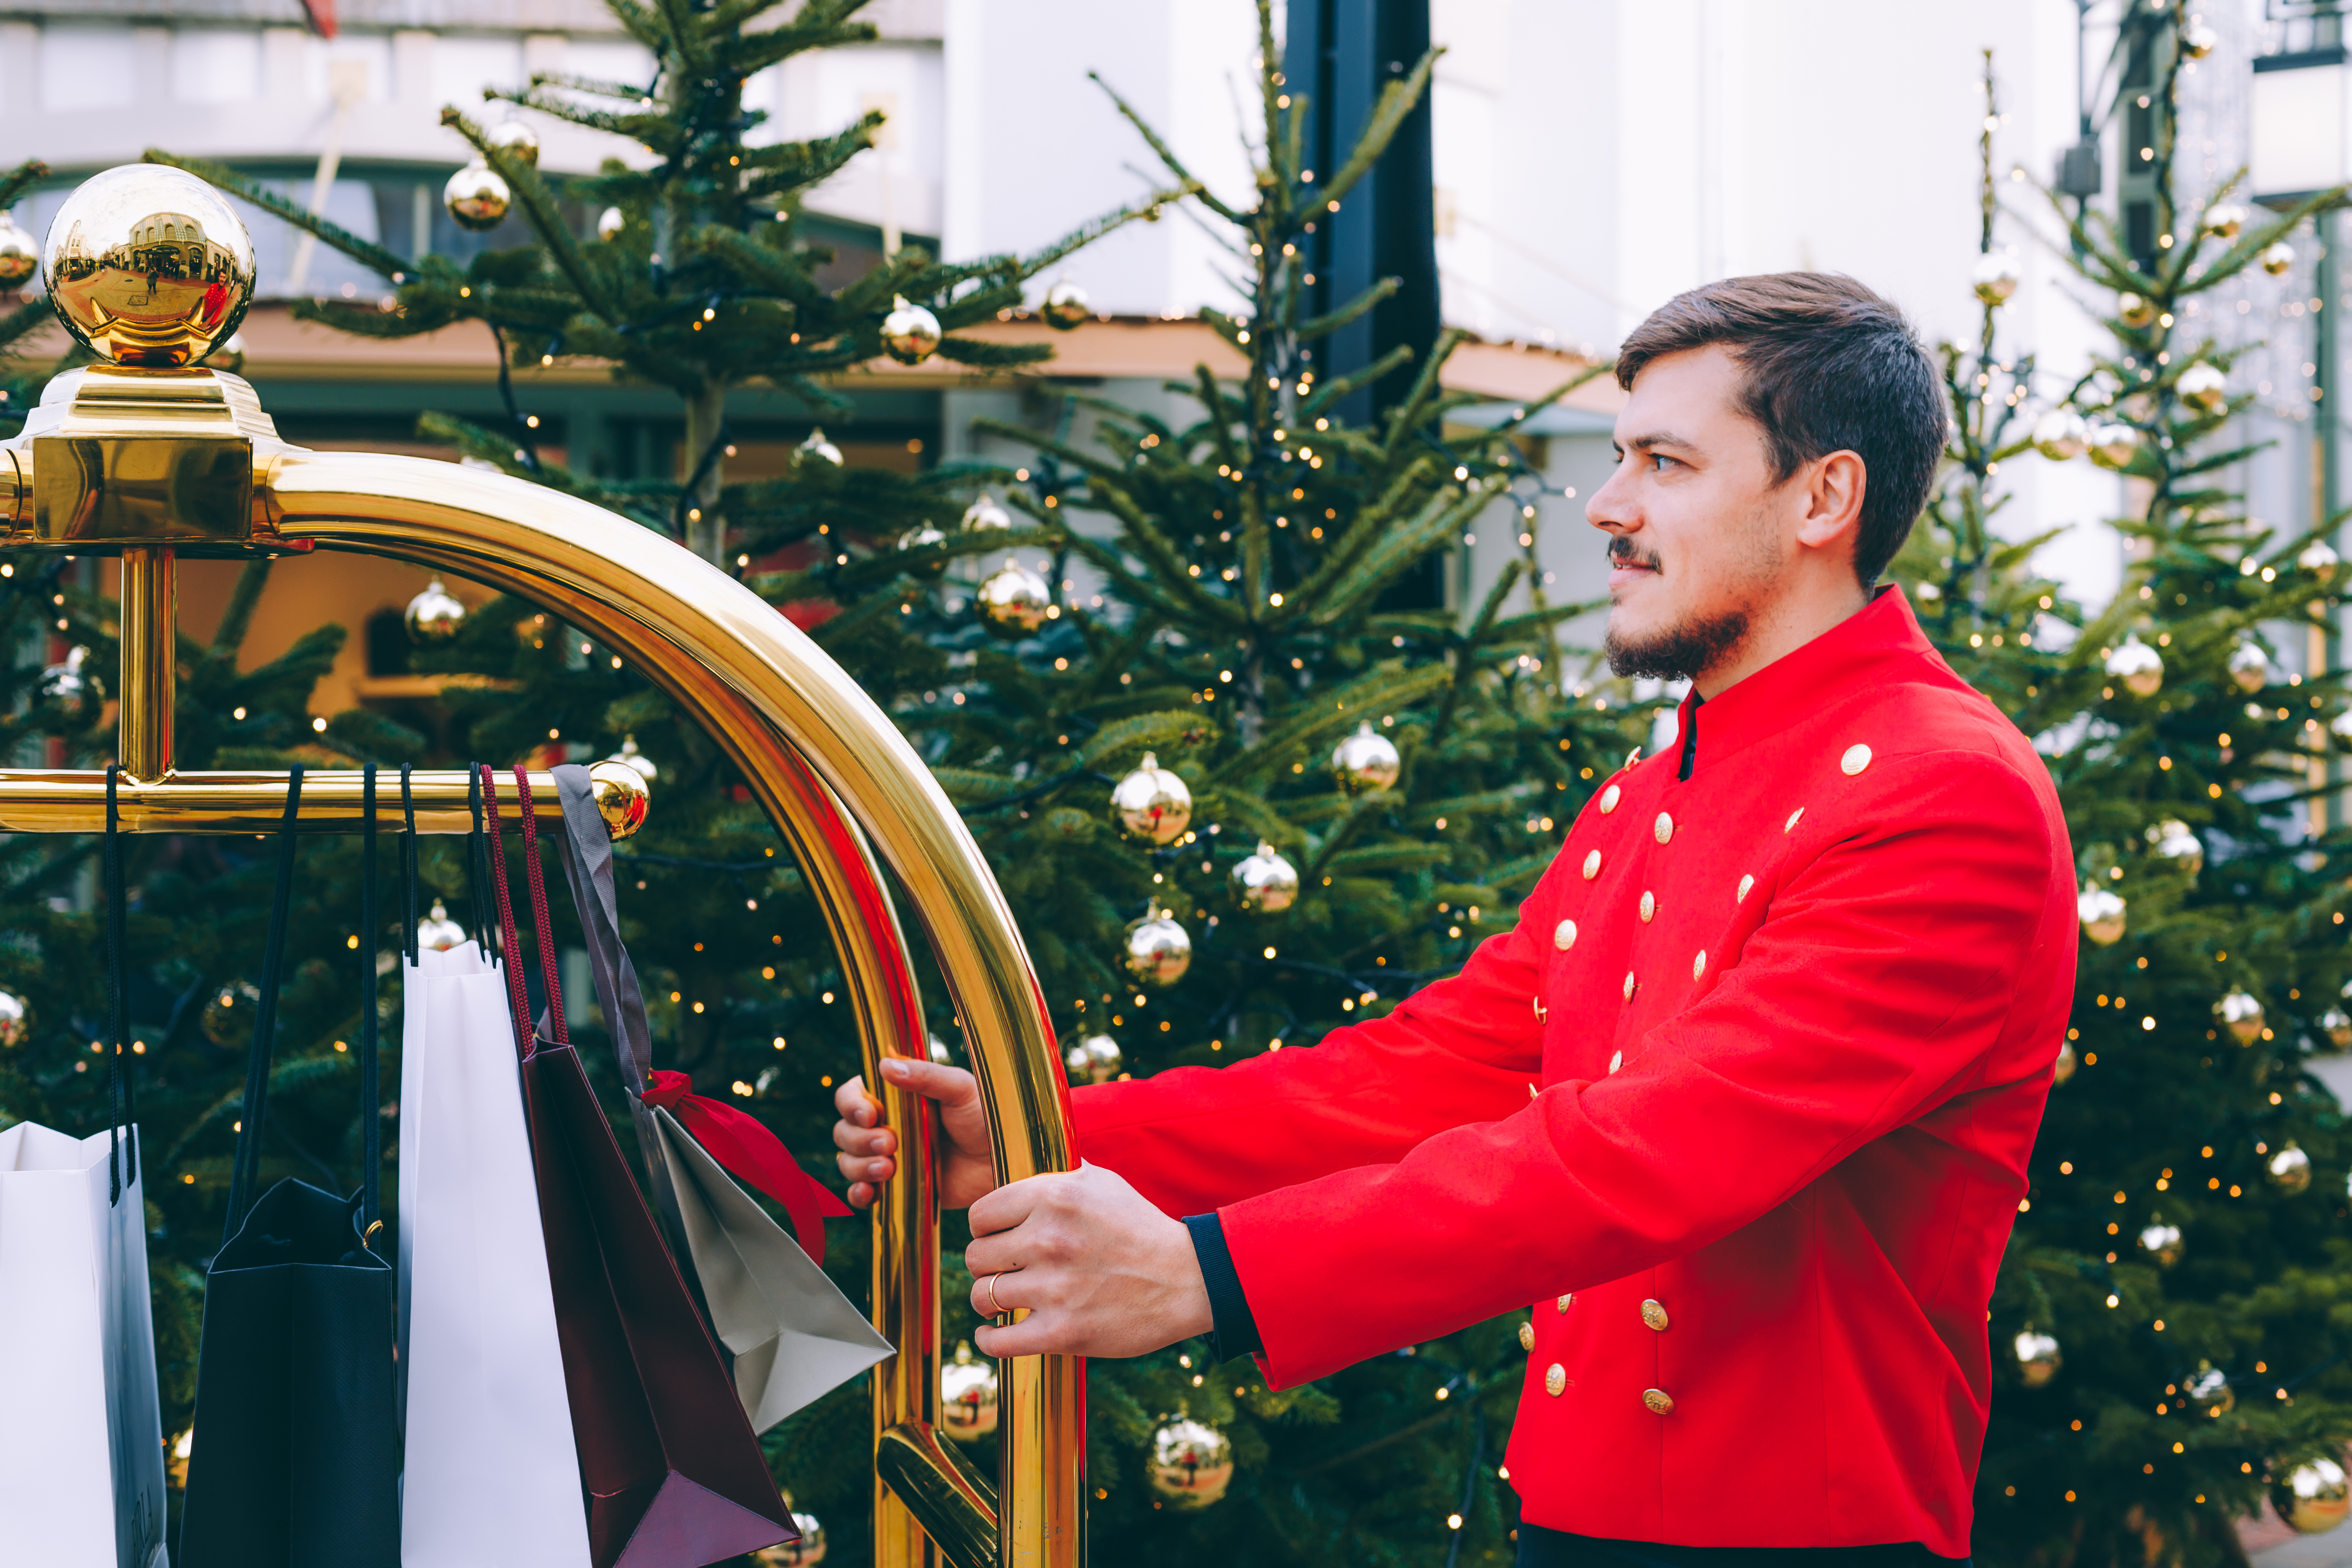 A personal valet pushing cart filled with holiday gifts with Christmas trees in the background.  Ultimate shopping experience at Fidenza Village. Concierge able to asssist in selecting holiday gifts to hands-free shopping. 